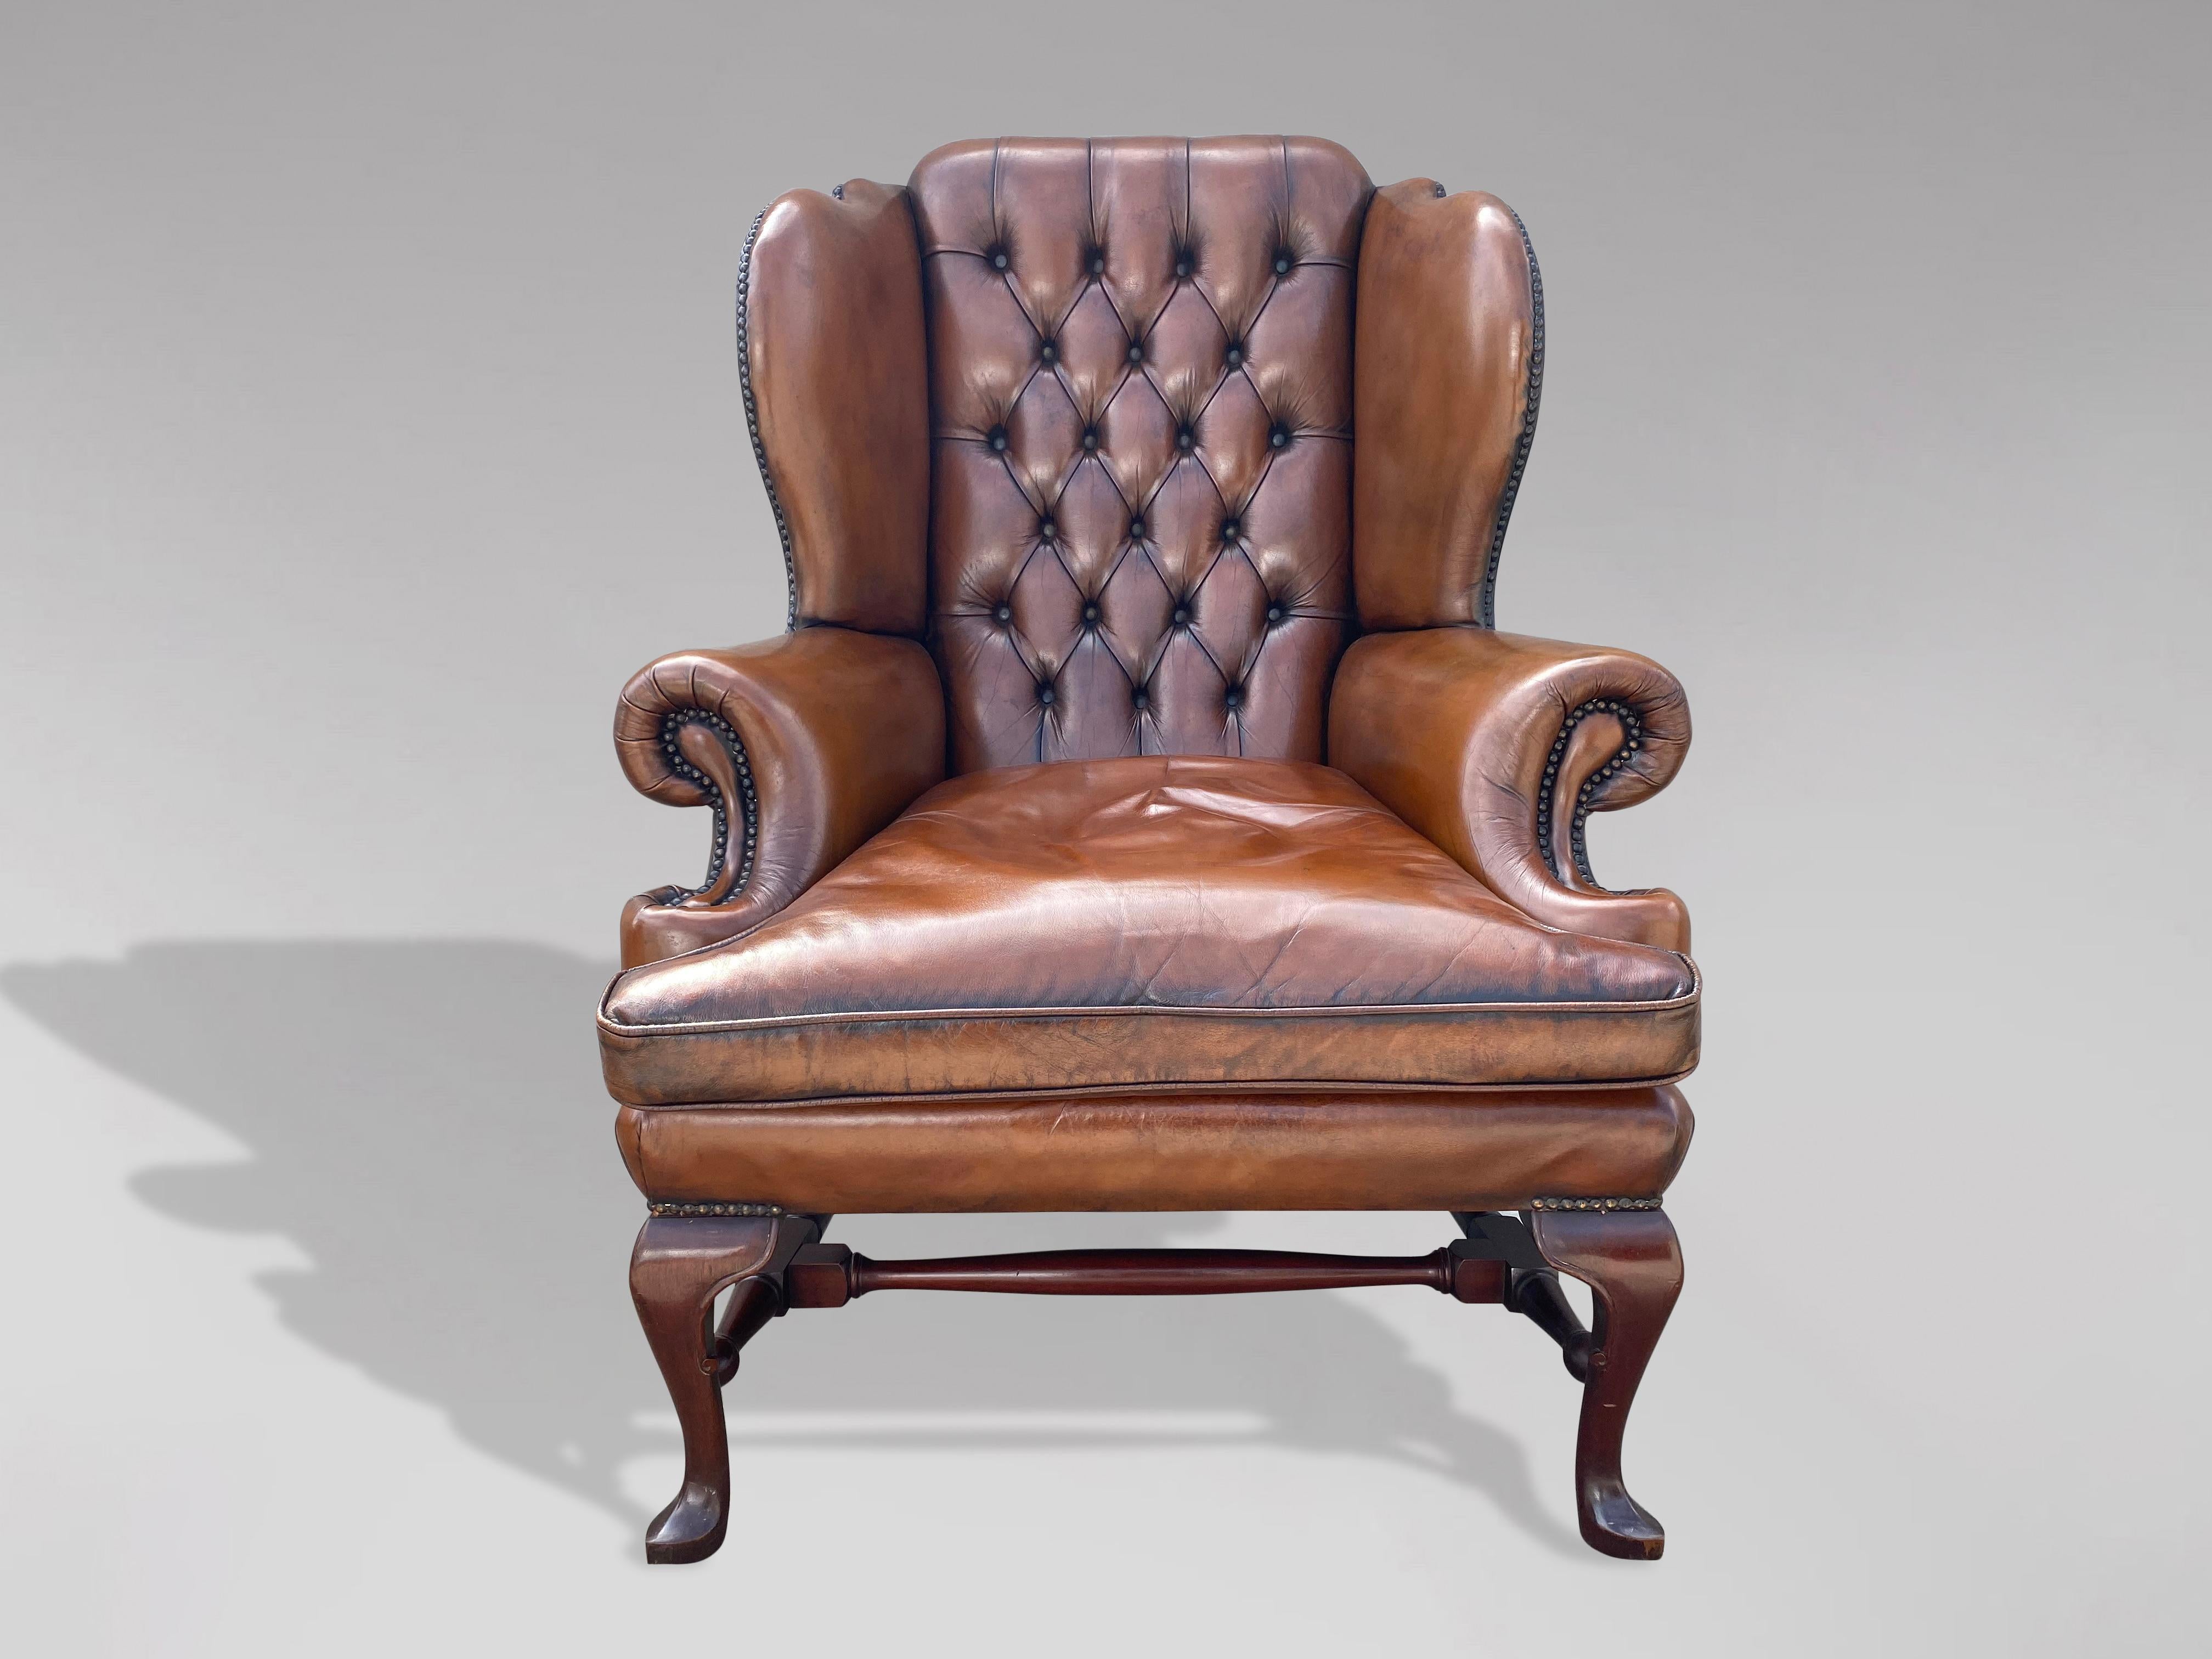 A great quality 20th century brown leather Queen Anne style wing armchair with buttoned back and loose feathered cushion, standing on mahogany front cabriole feet united by shaped stretchers. Great colour. Very comfortable seating.

The dimensions